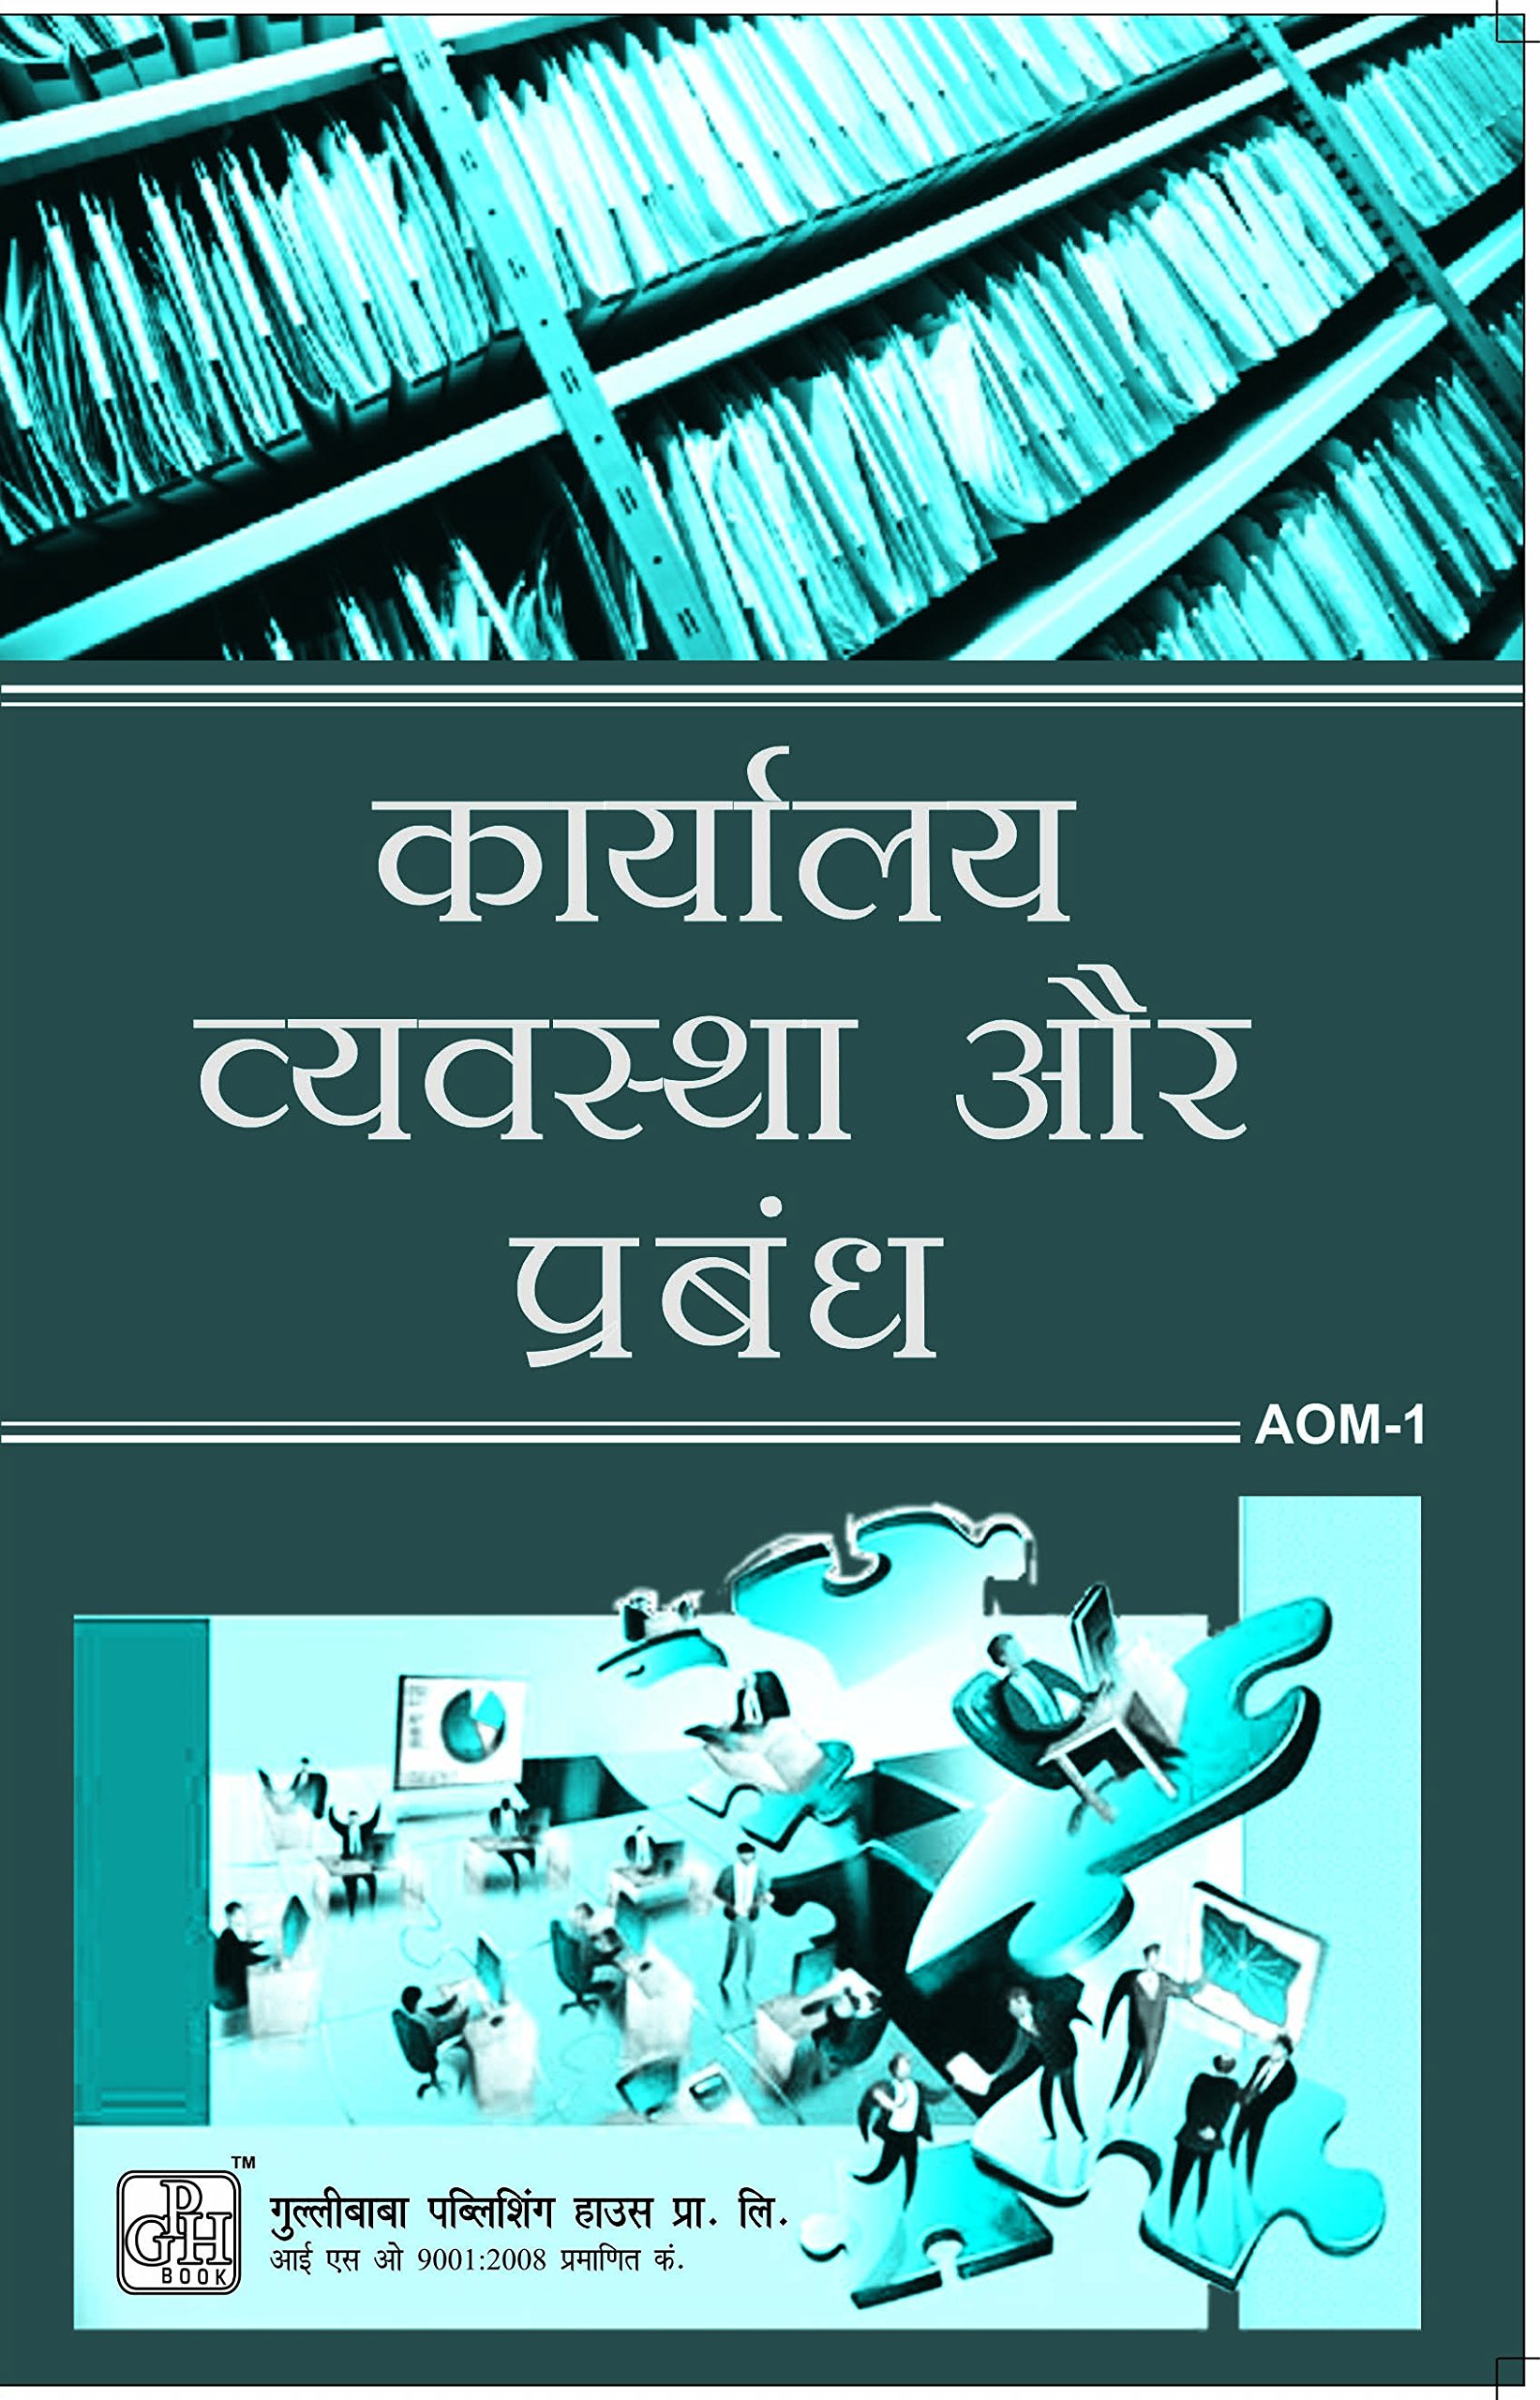 NEW AOM1 Office Organization and Management (IGNOU Help book for AOM-1 in Hindi Medium)